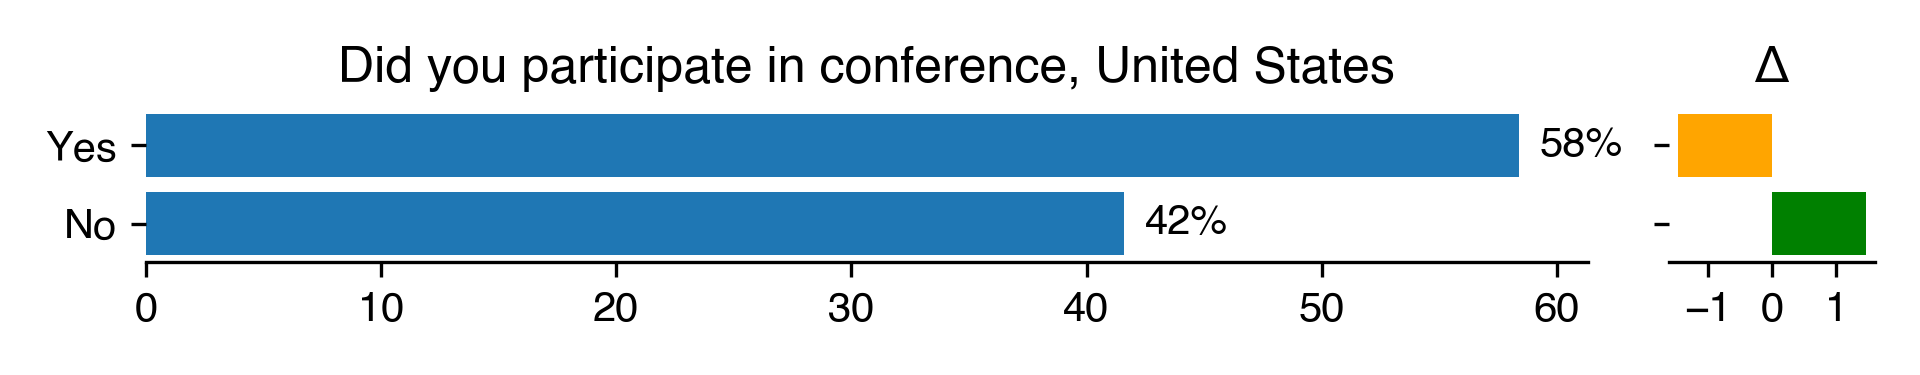 did-you-participate-in-conference